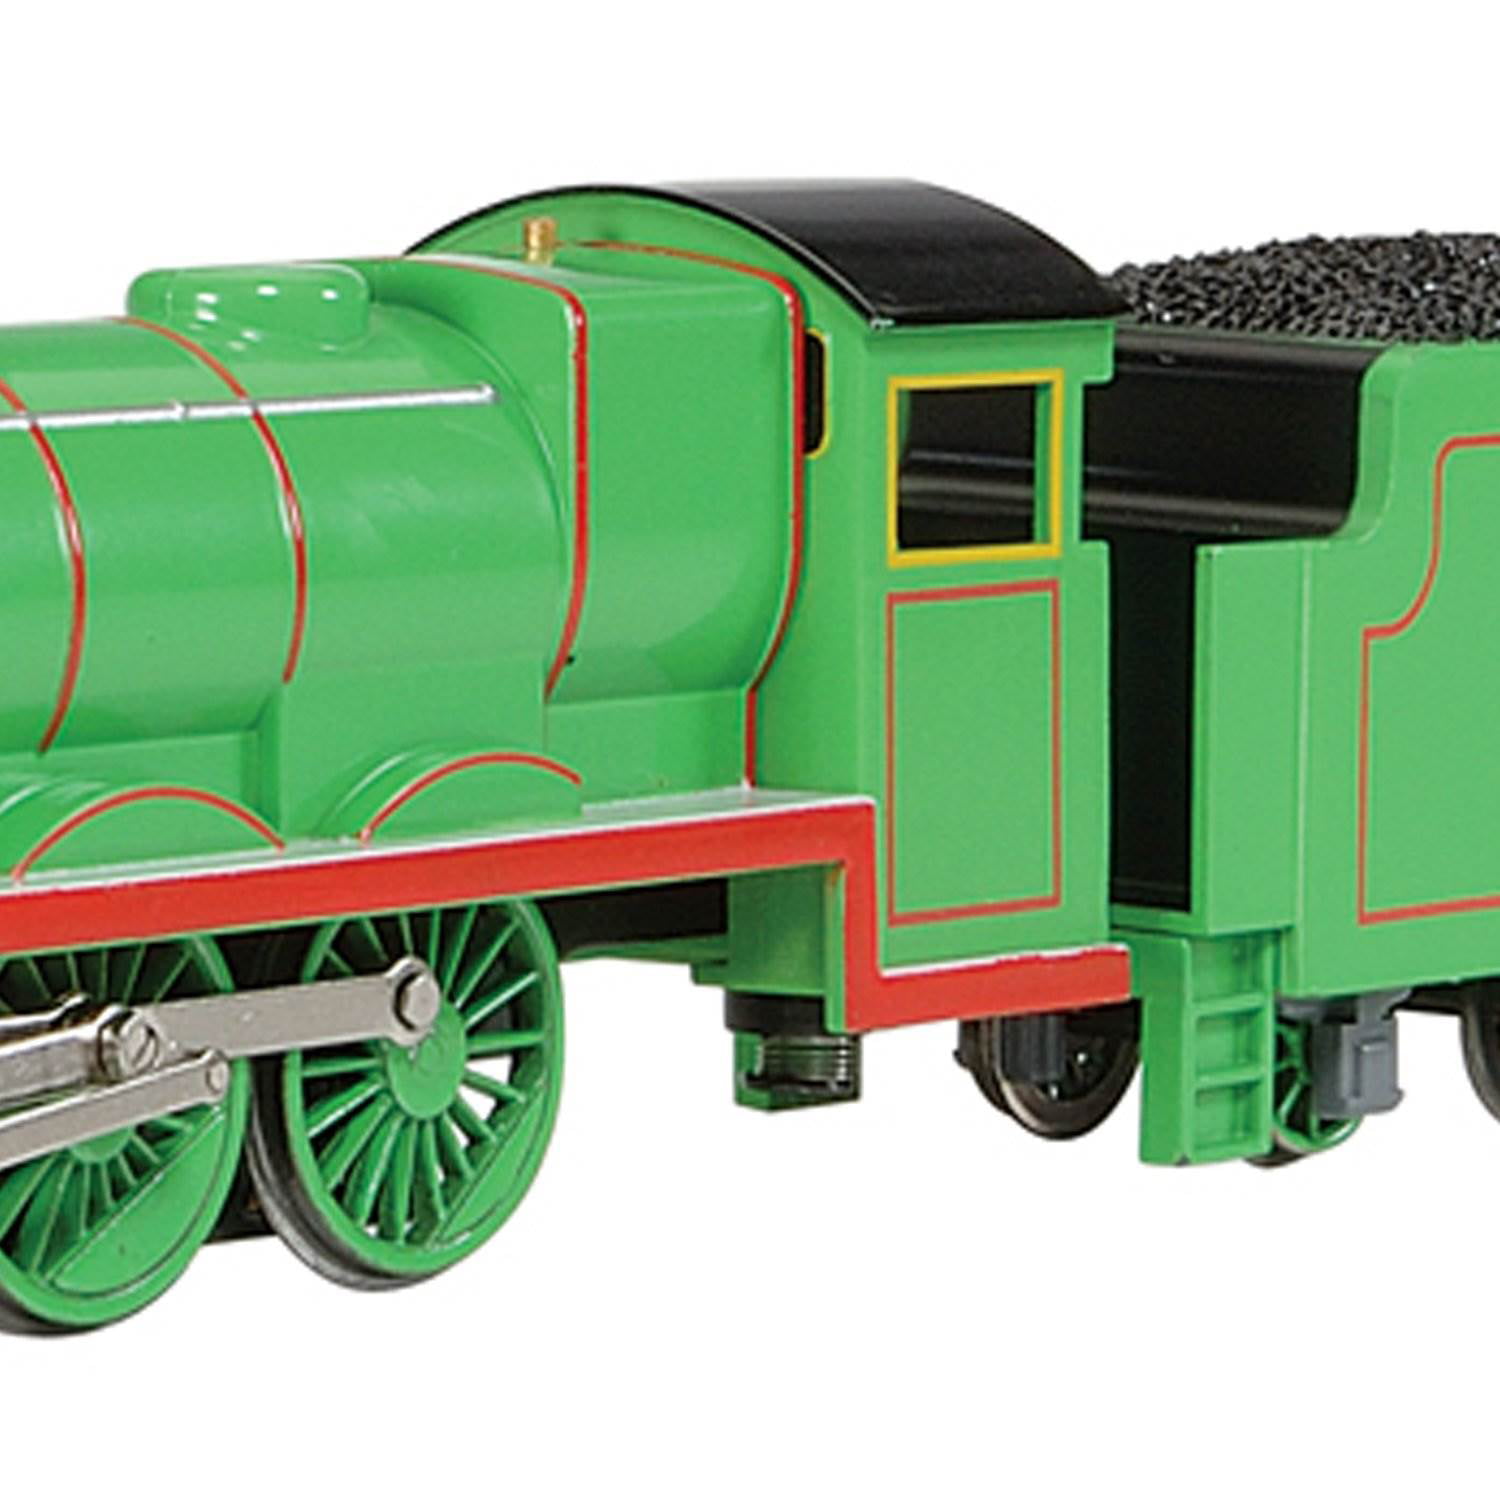 henry the green engine toy